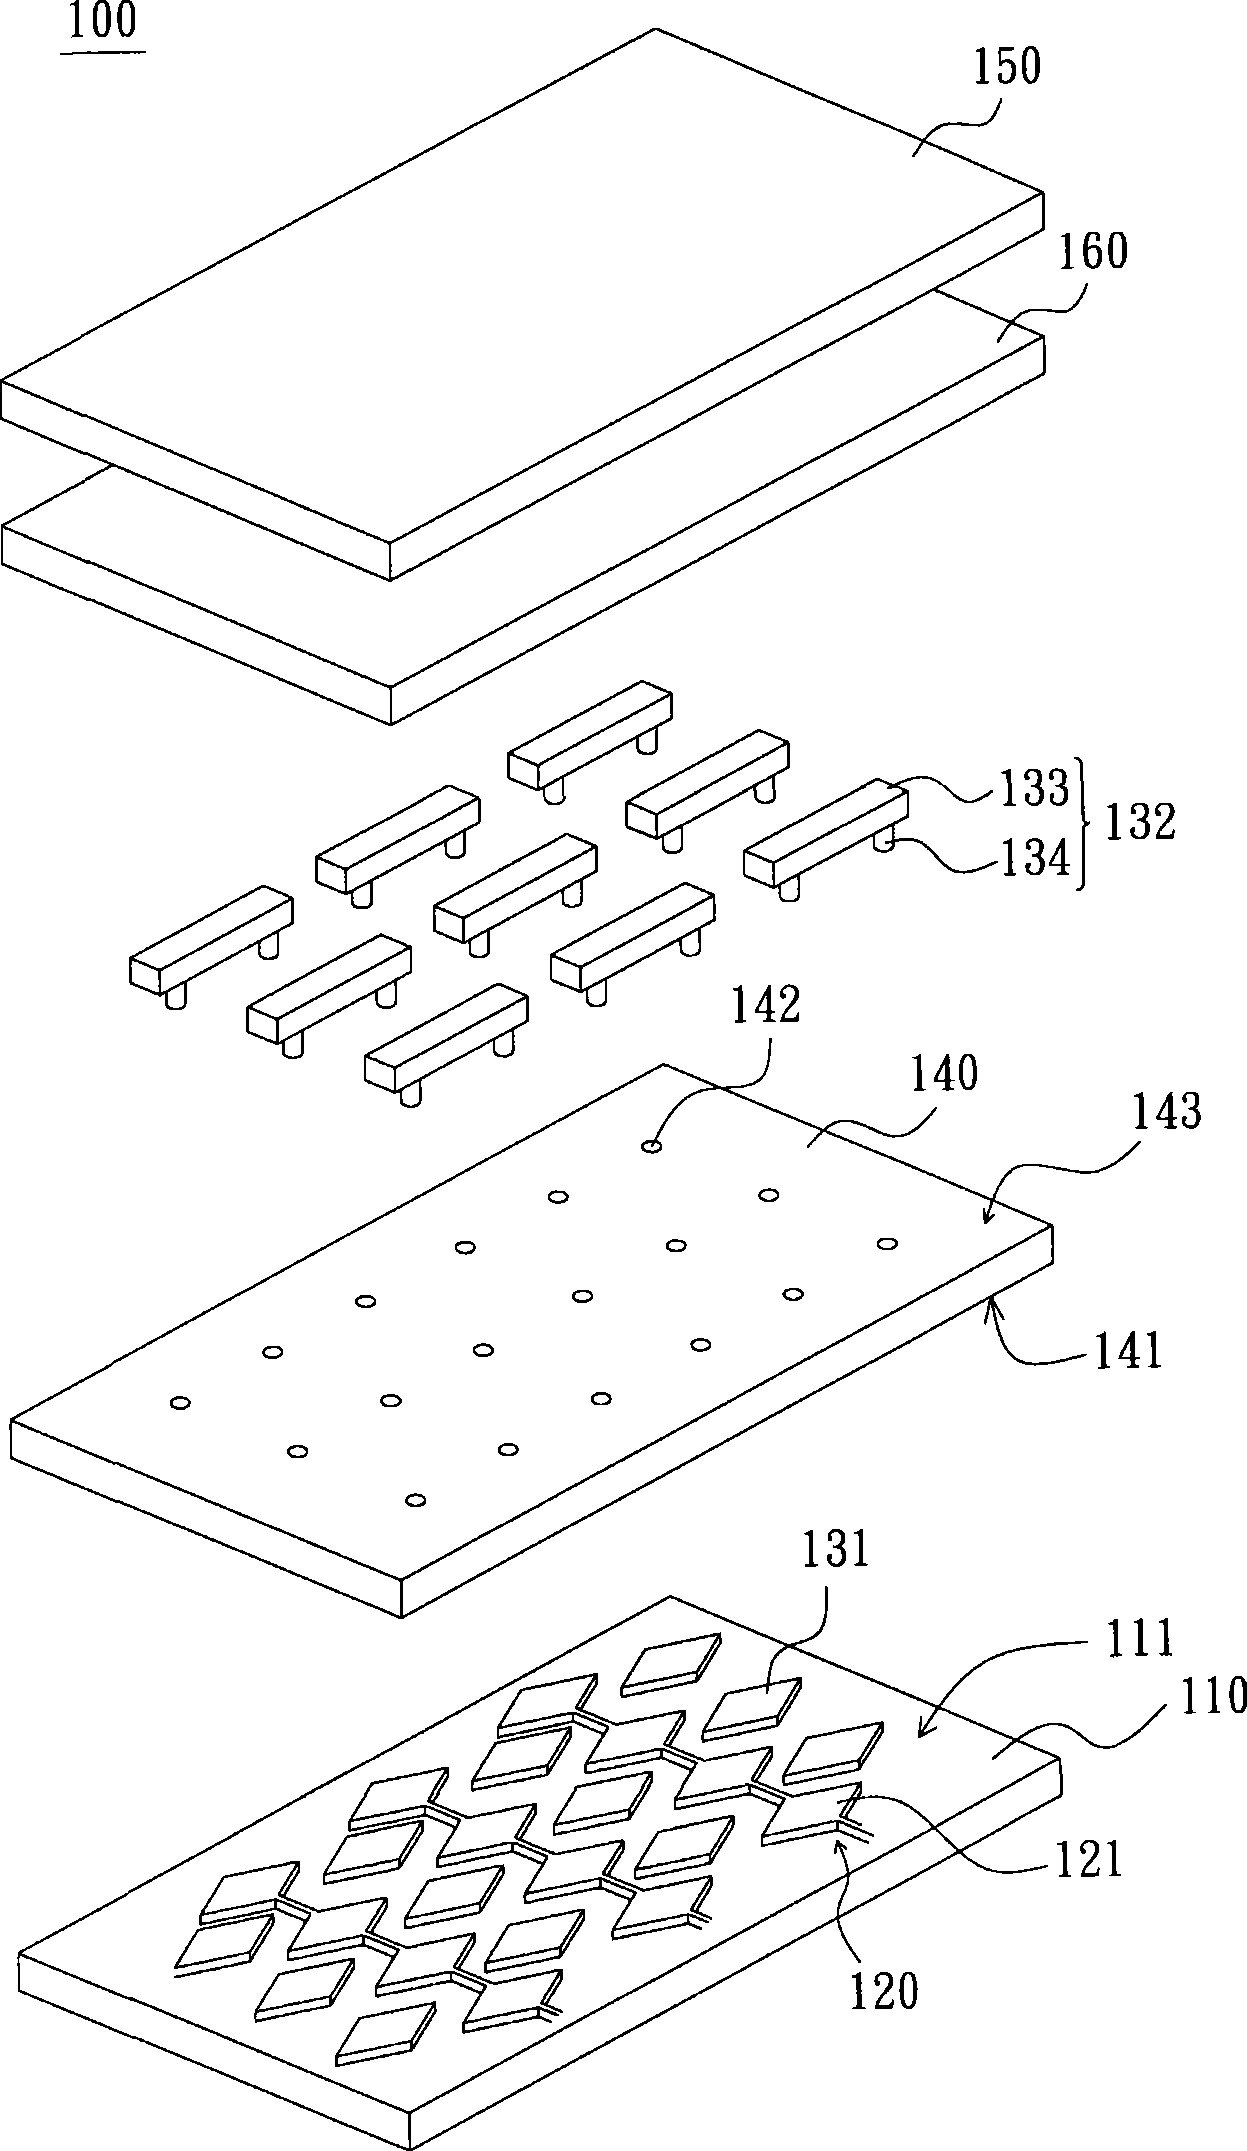 Touch control panel device